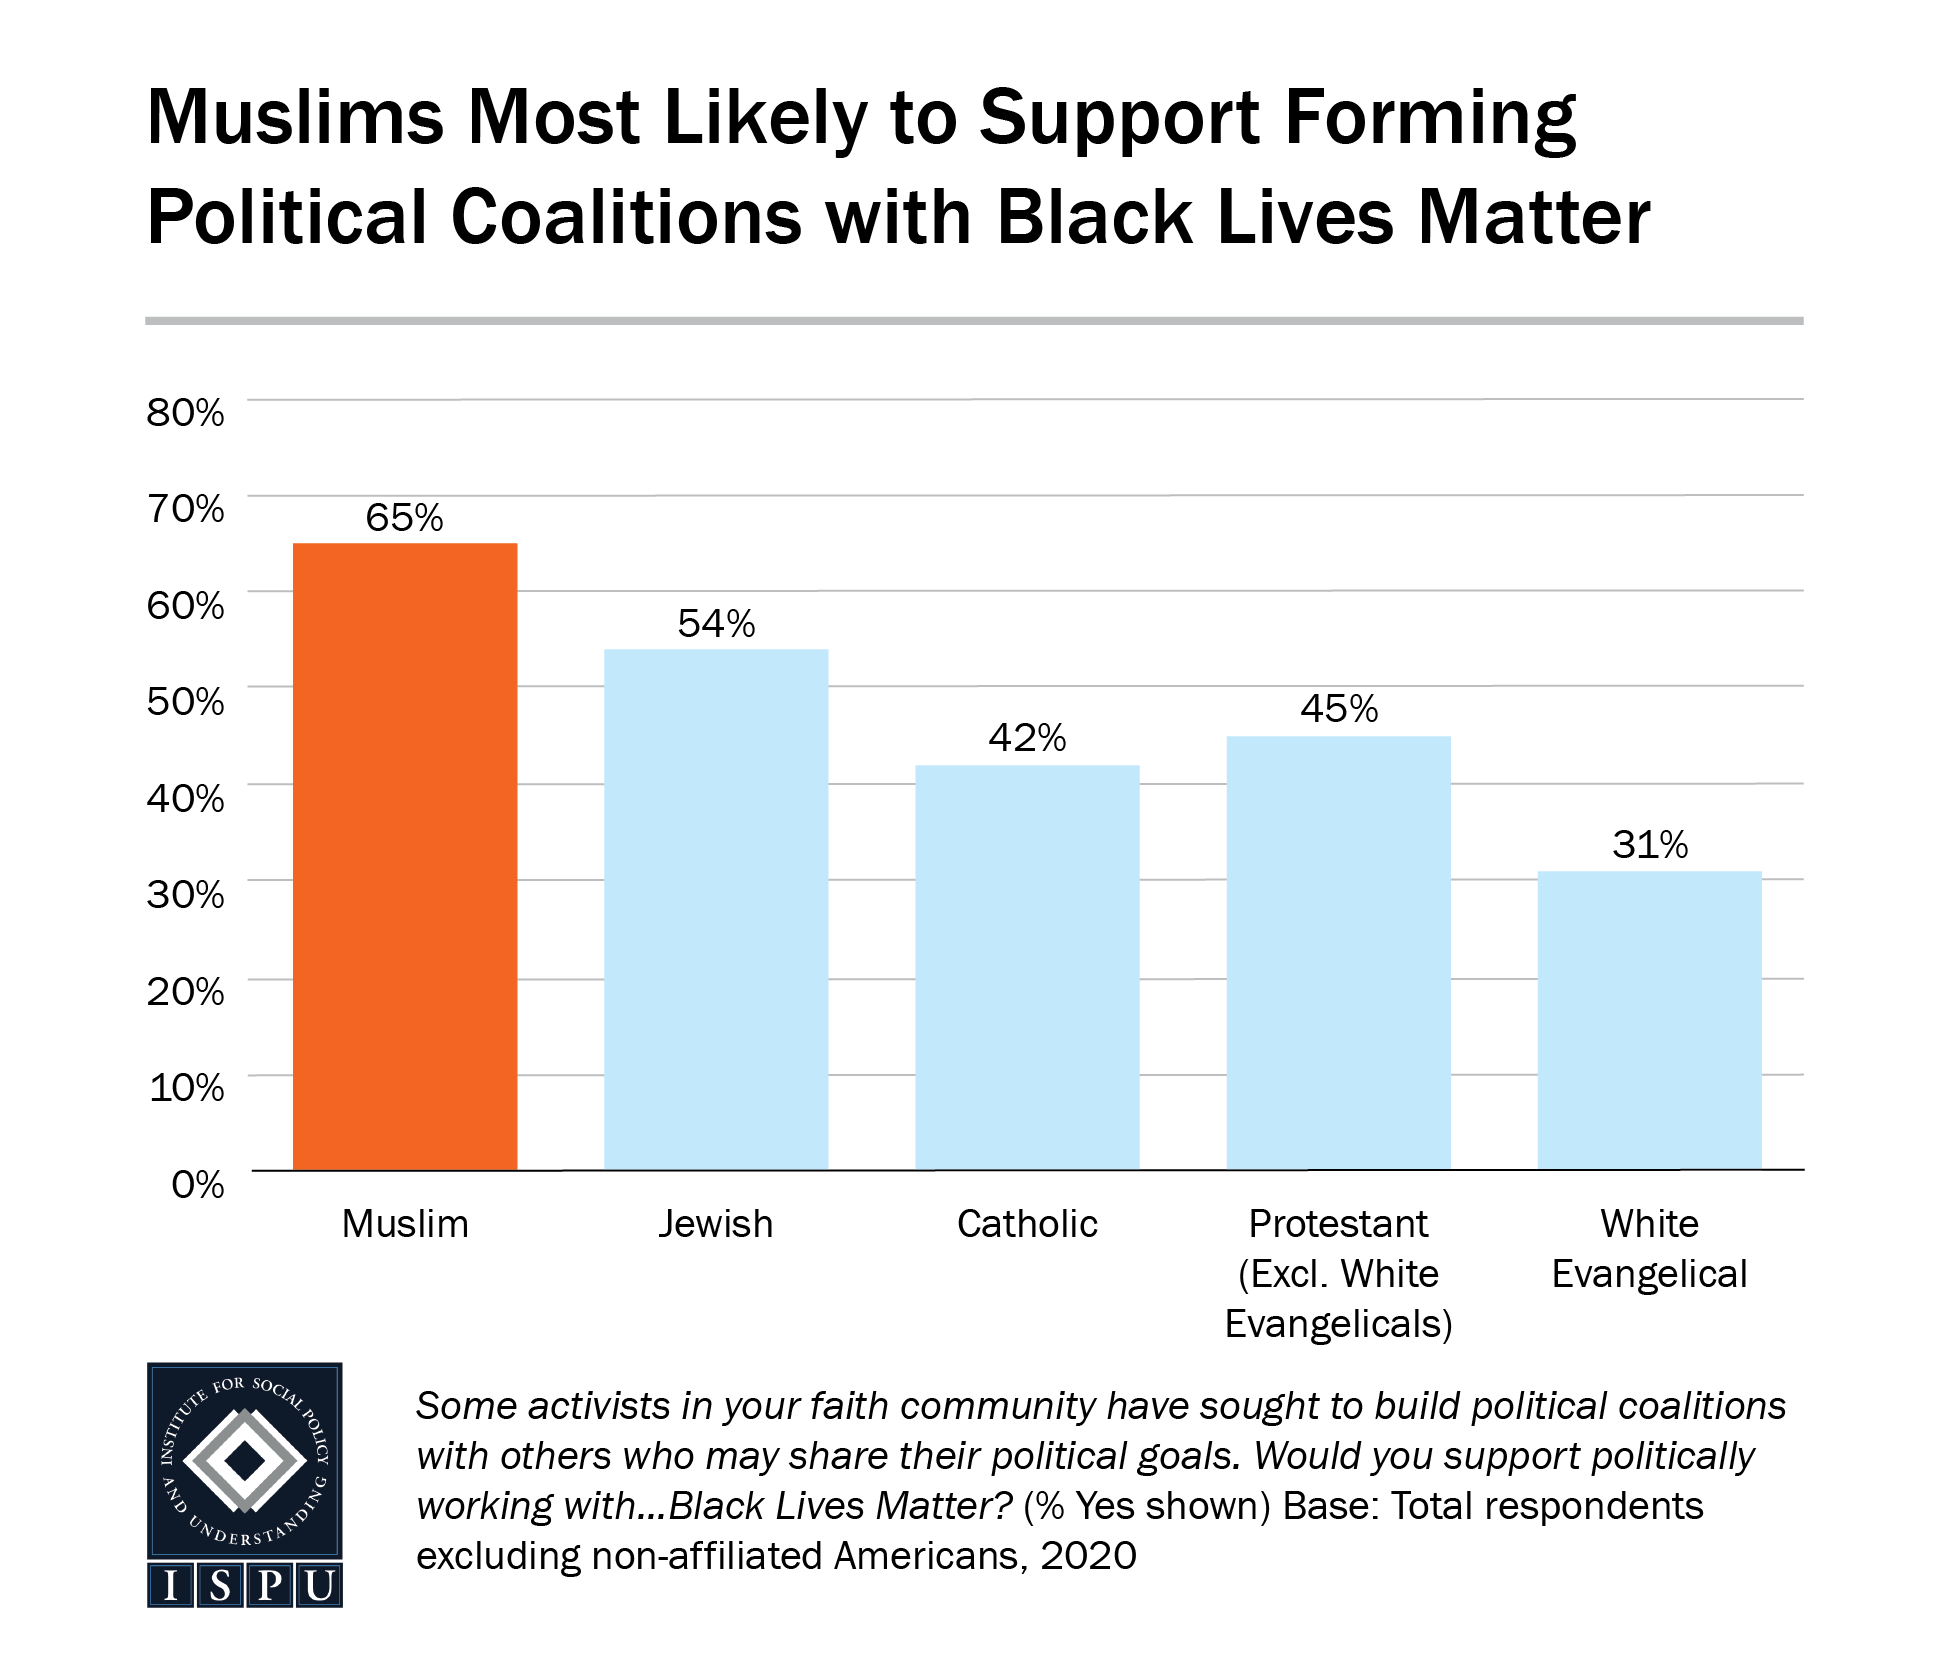 A bar graph showing that Muslims are the most likely faith group in the US to support forming political coalitions with Black Lives Matter